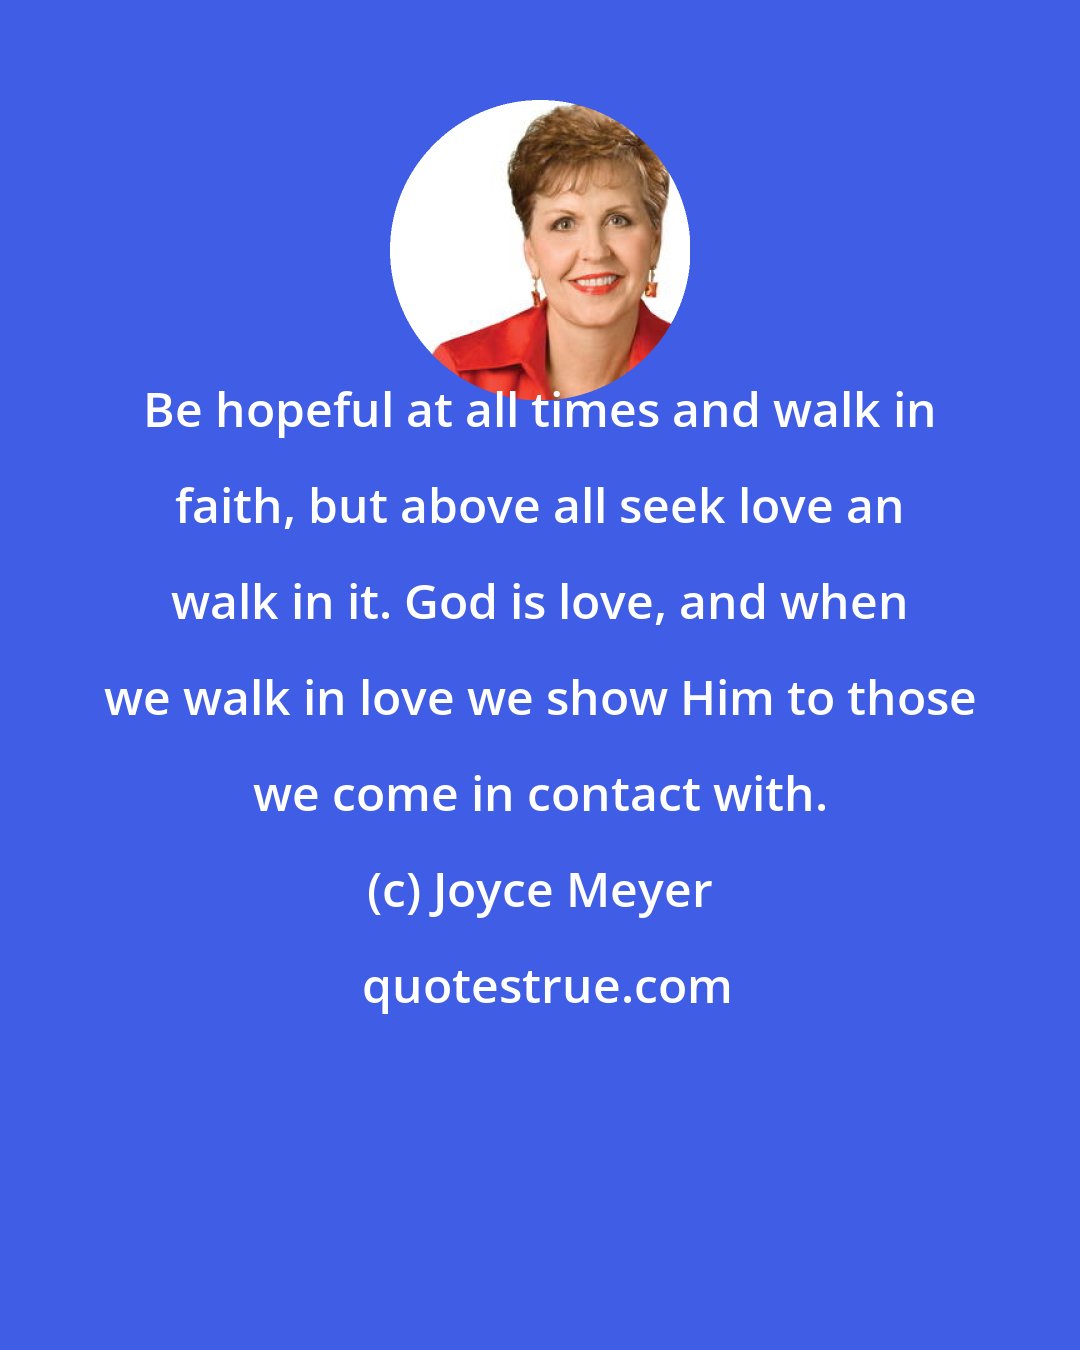 Joyce Meyer: Be hopeful at all times and walk in faith, but above all seek love an walk in it. God is love, and when we walk in love we show Him to those we come in contact with.